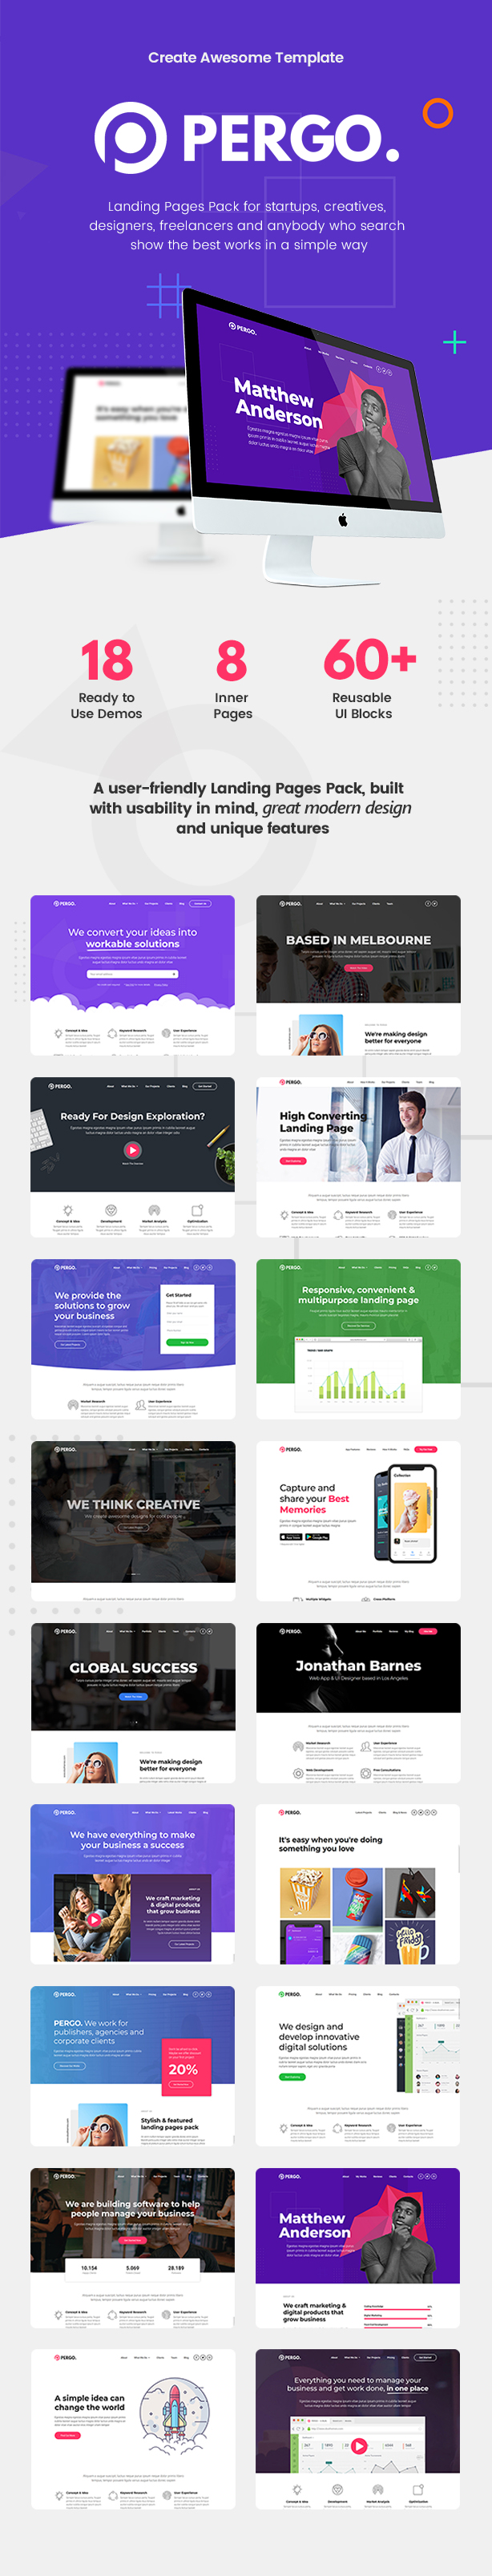 Pergo - Multipurpose Landing Page Theme for App, Product, Construction & Business Marketing Website - 3